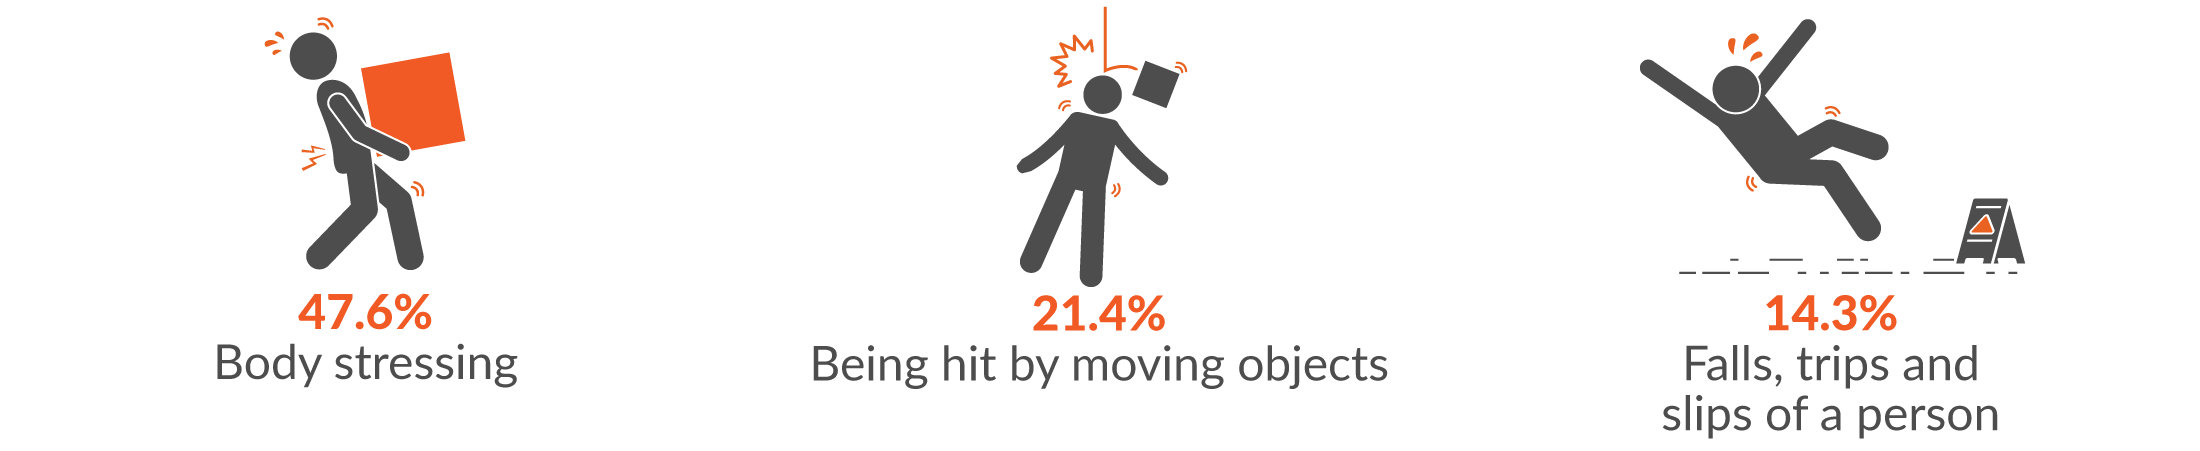 This infographic shows the main three mechanisms of serious injury for Retail Trade claims were 47.6% body stressing; 21.4% being hit by moving objects; and 14.3% falls, trips and slips of a person.